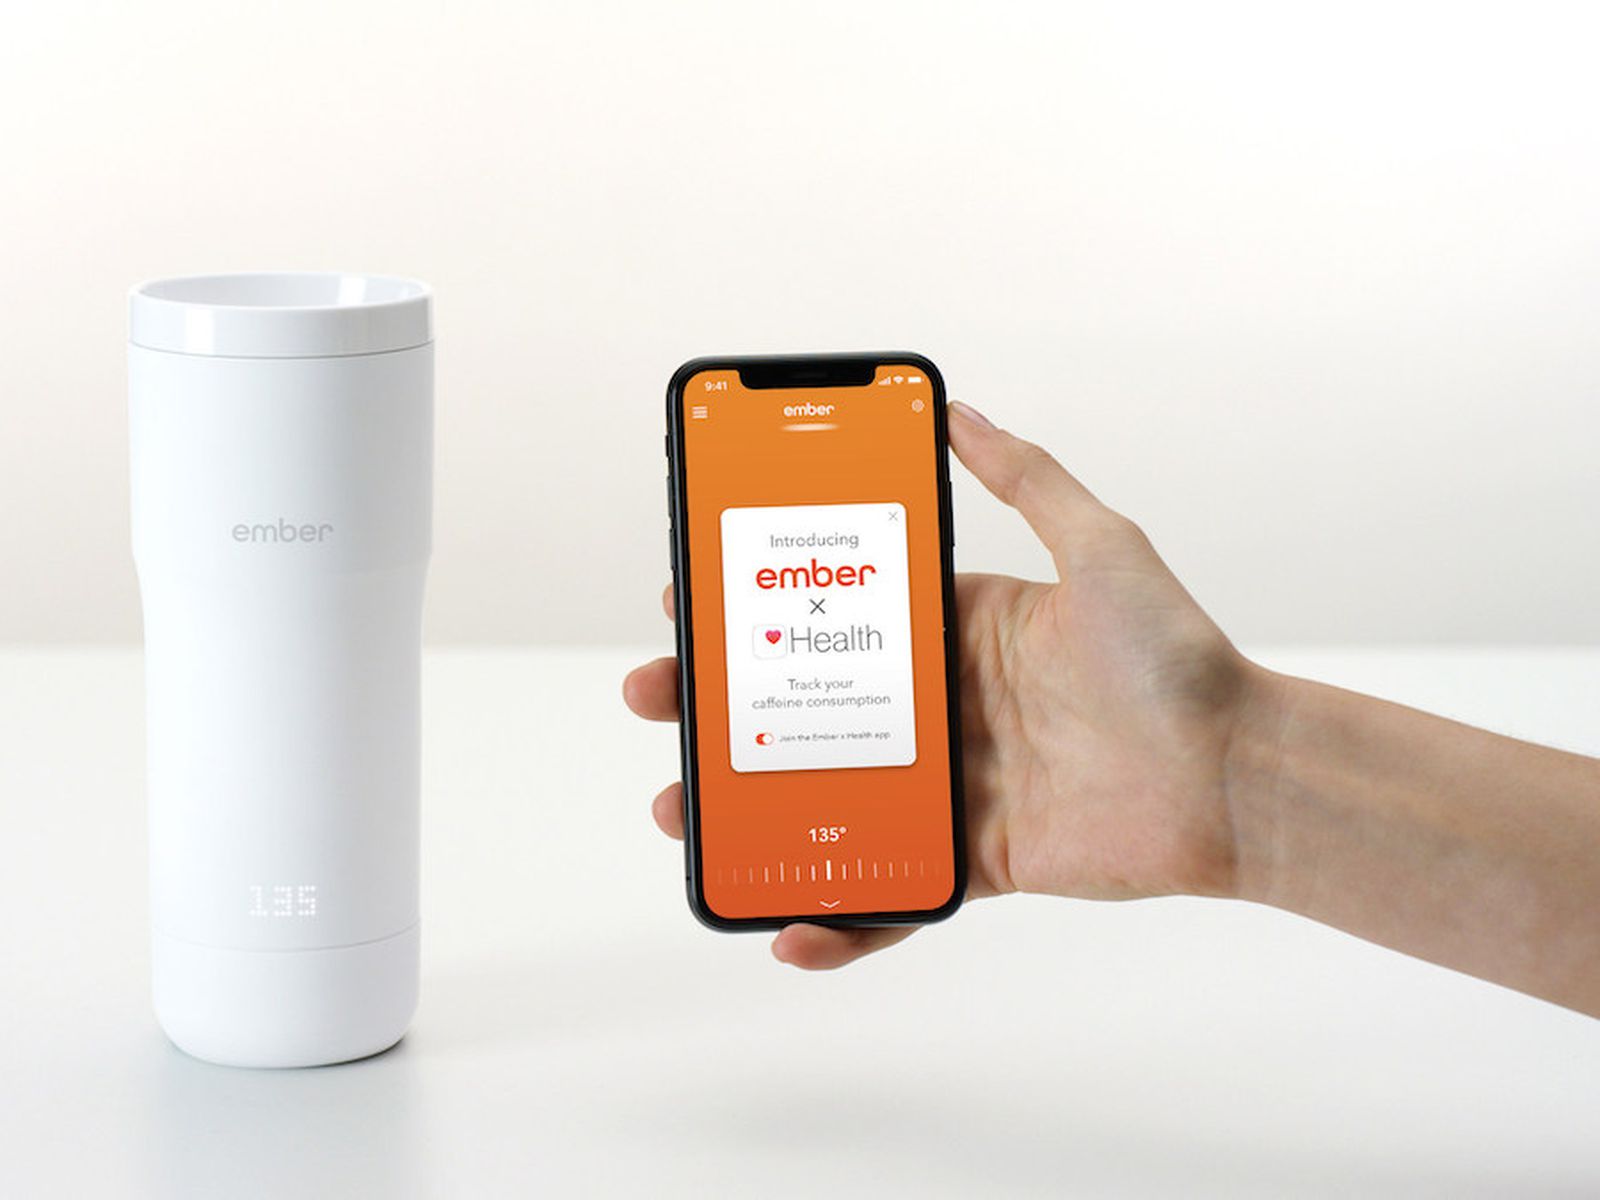 Ember Smart Mug 2 In Stock Availability and Price Tracking